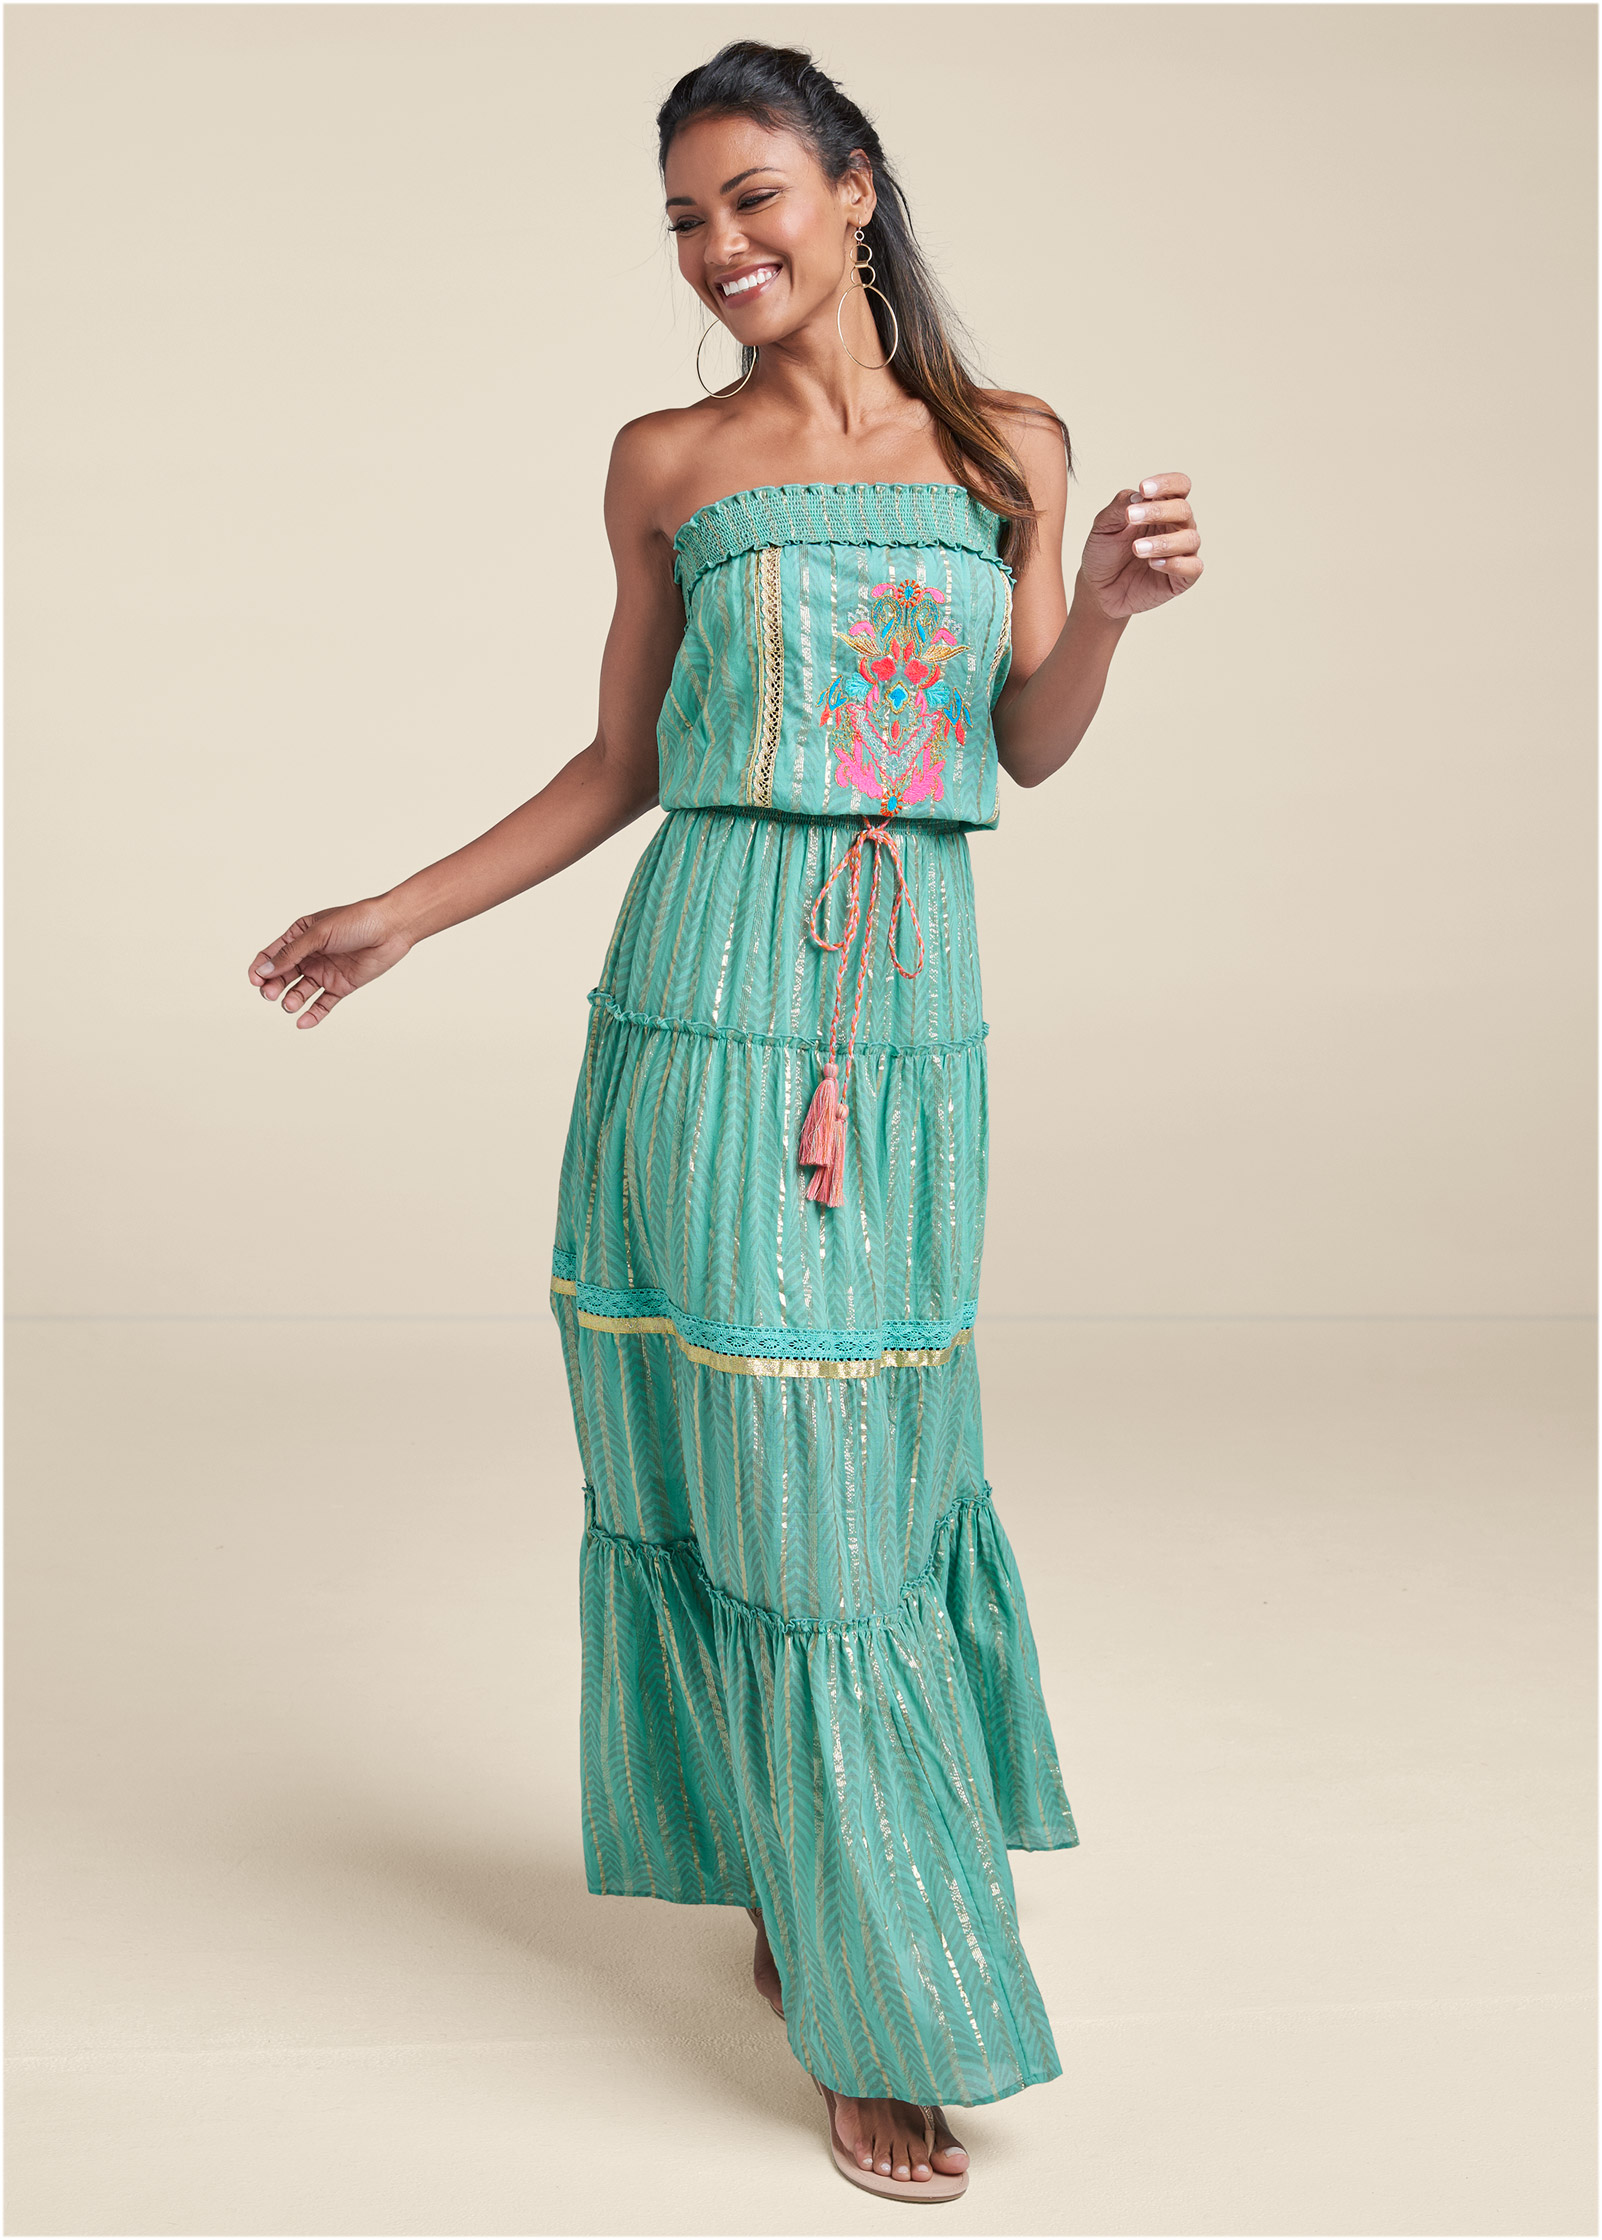 Embroidered Maxi Dress in Turquoise Multi | VENUS